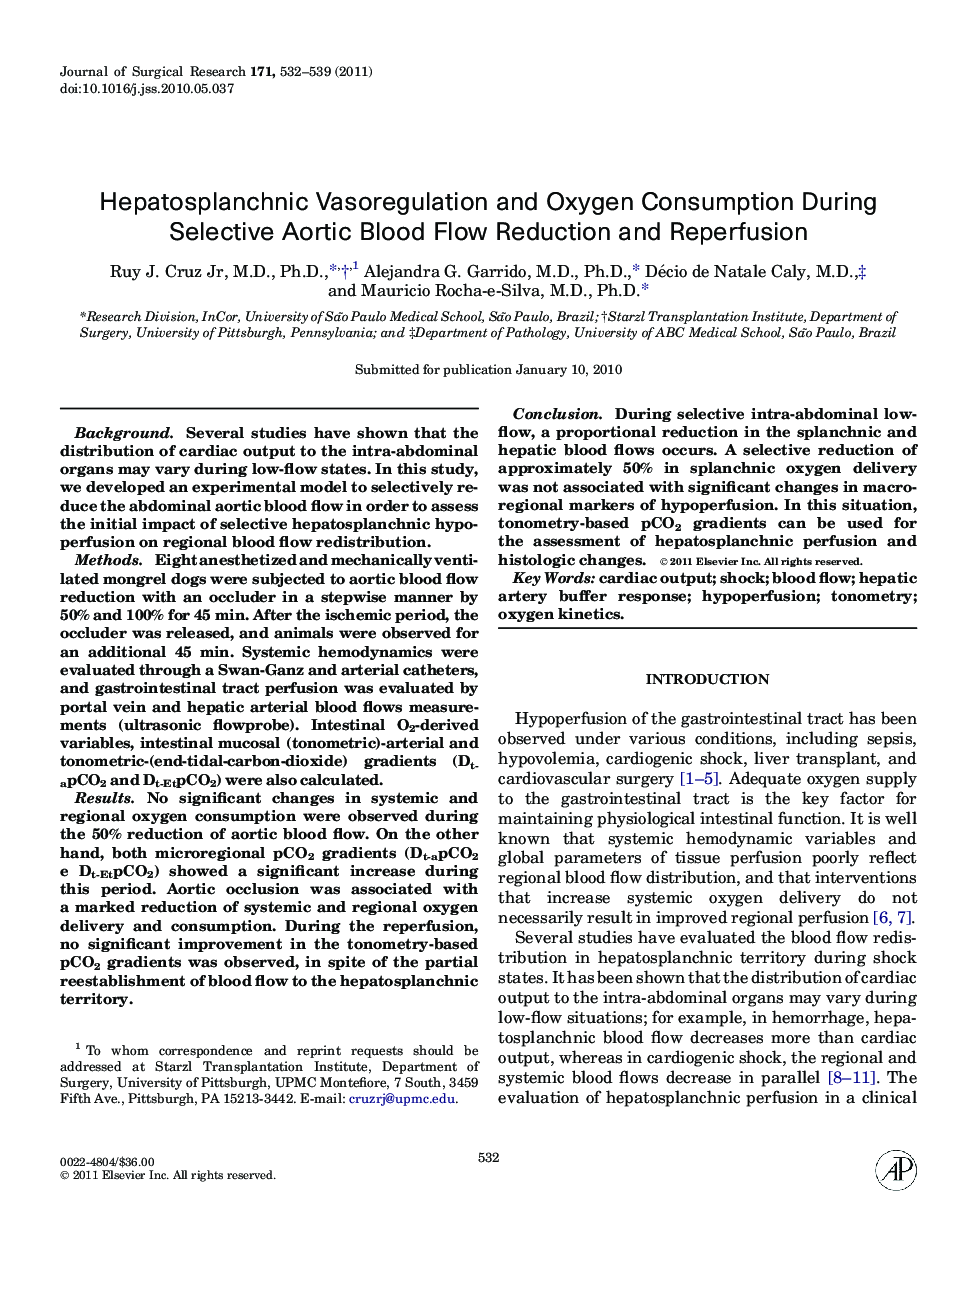 Hepatosplanchnic Vasoregulation and Oxygen Consumption During Selective Aortic Blood Flow Reduction and Reperfusion